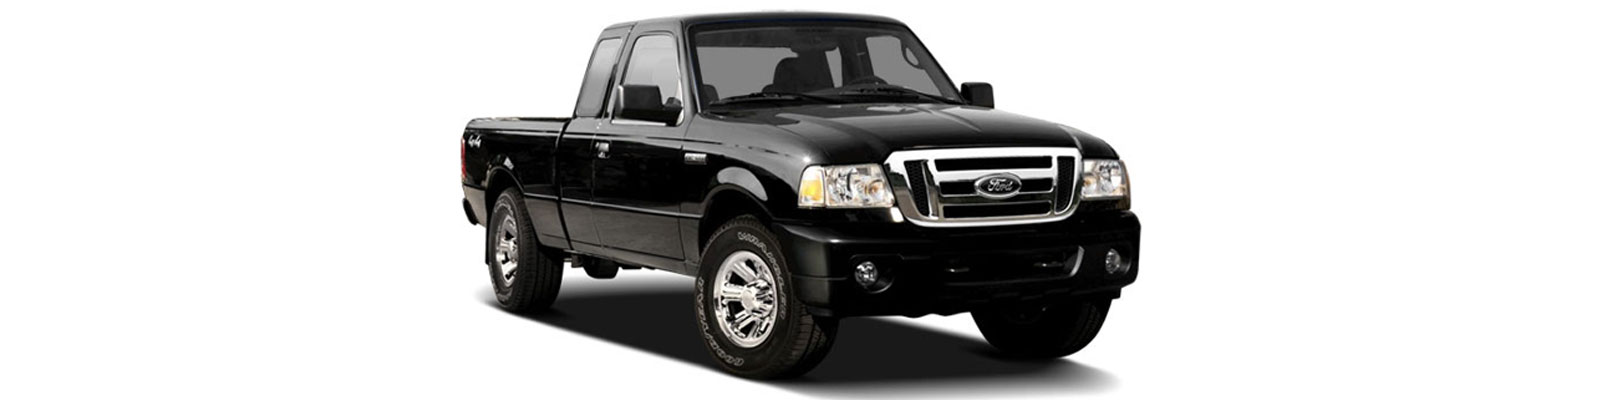 Accessories For The Ford Ranger Super Cab 2009 to 2012